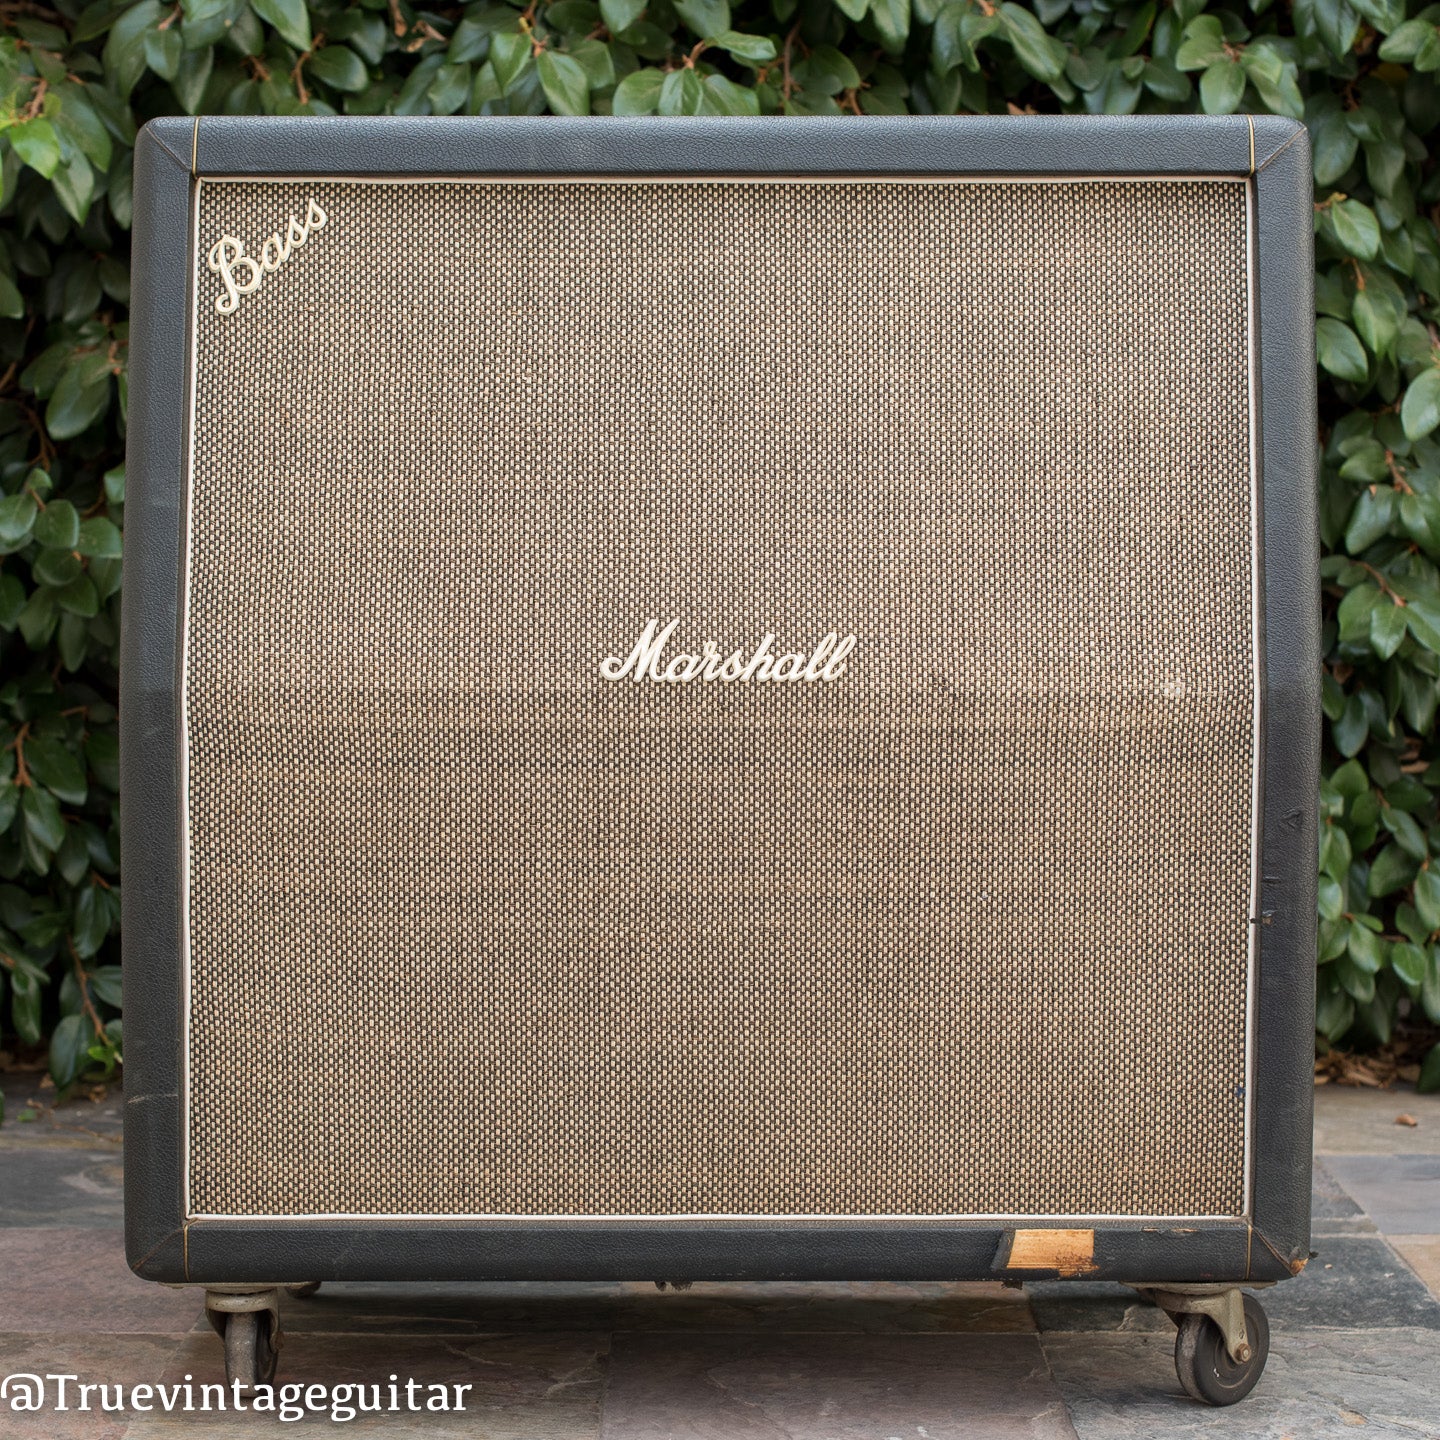 Where to sell vintage Marshall amp